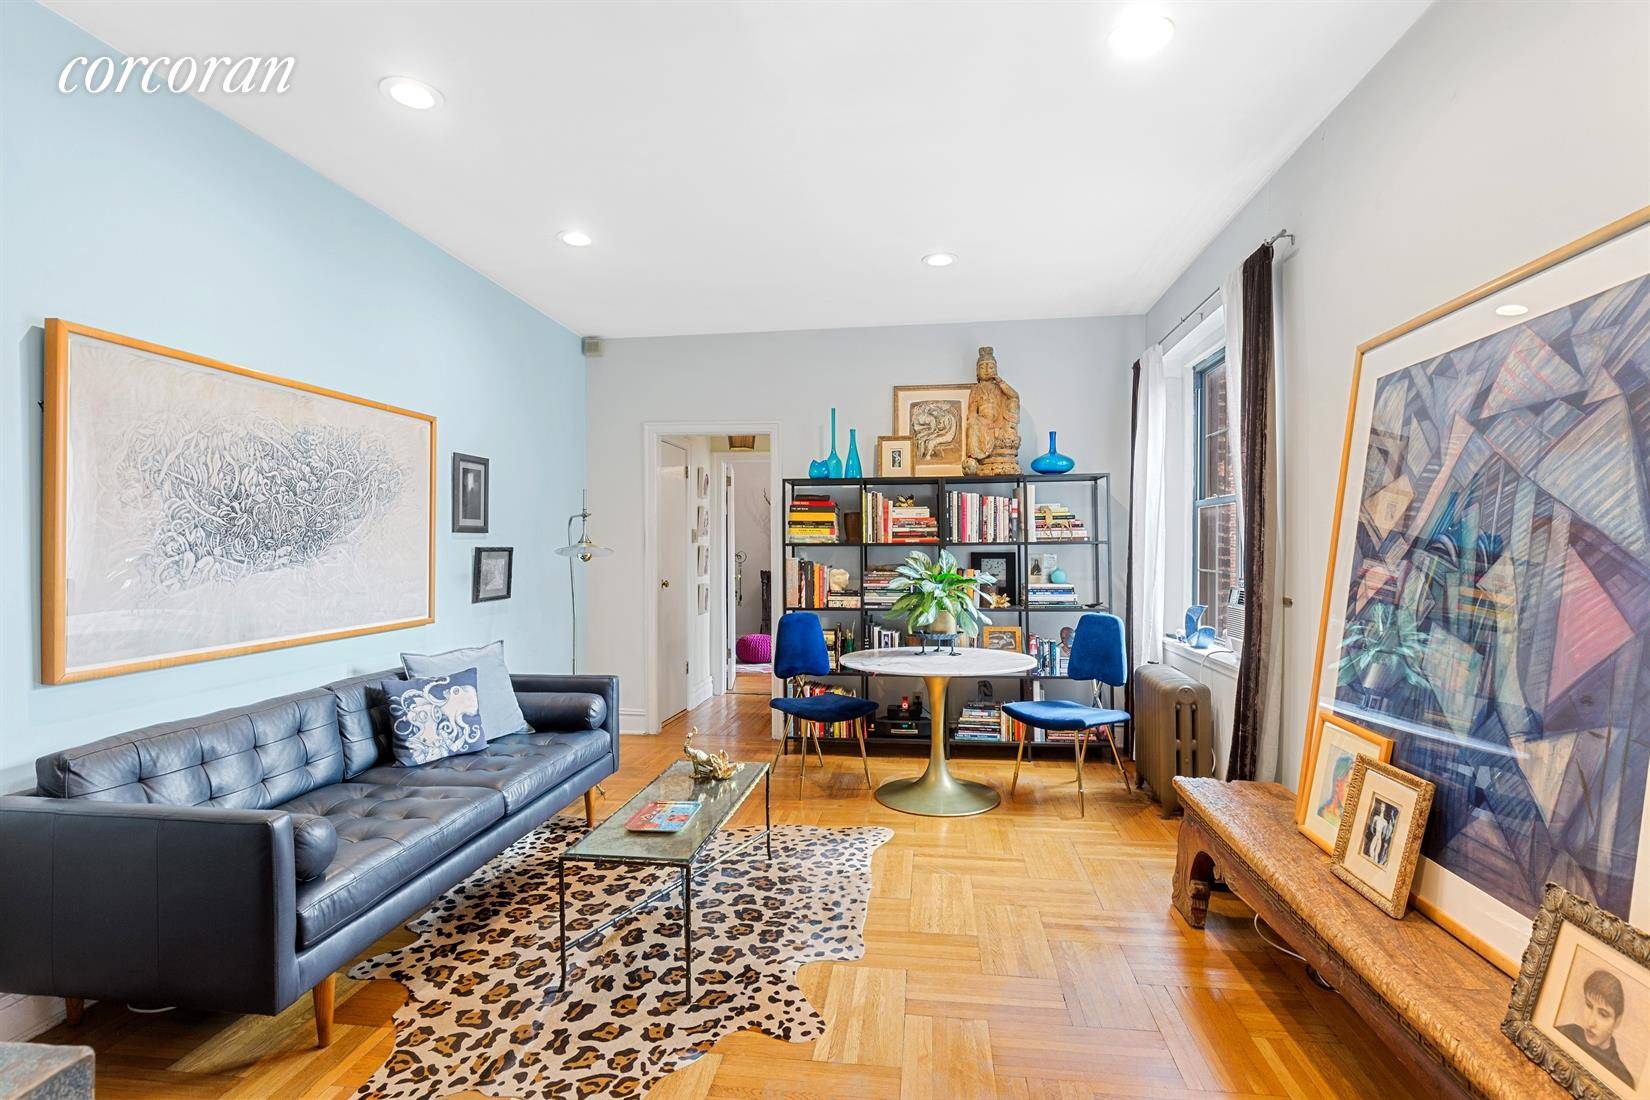 Beautifully designed with great proportions, this lovely one bedroom home on the top floor of Brooklyn's beloved 2 Grace Court offers great space with a wonderful layout.